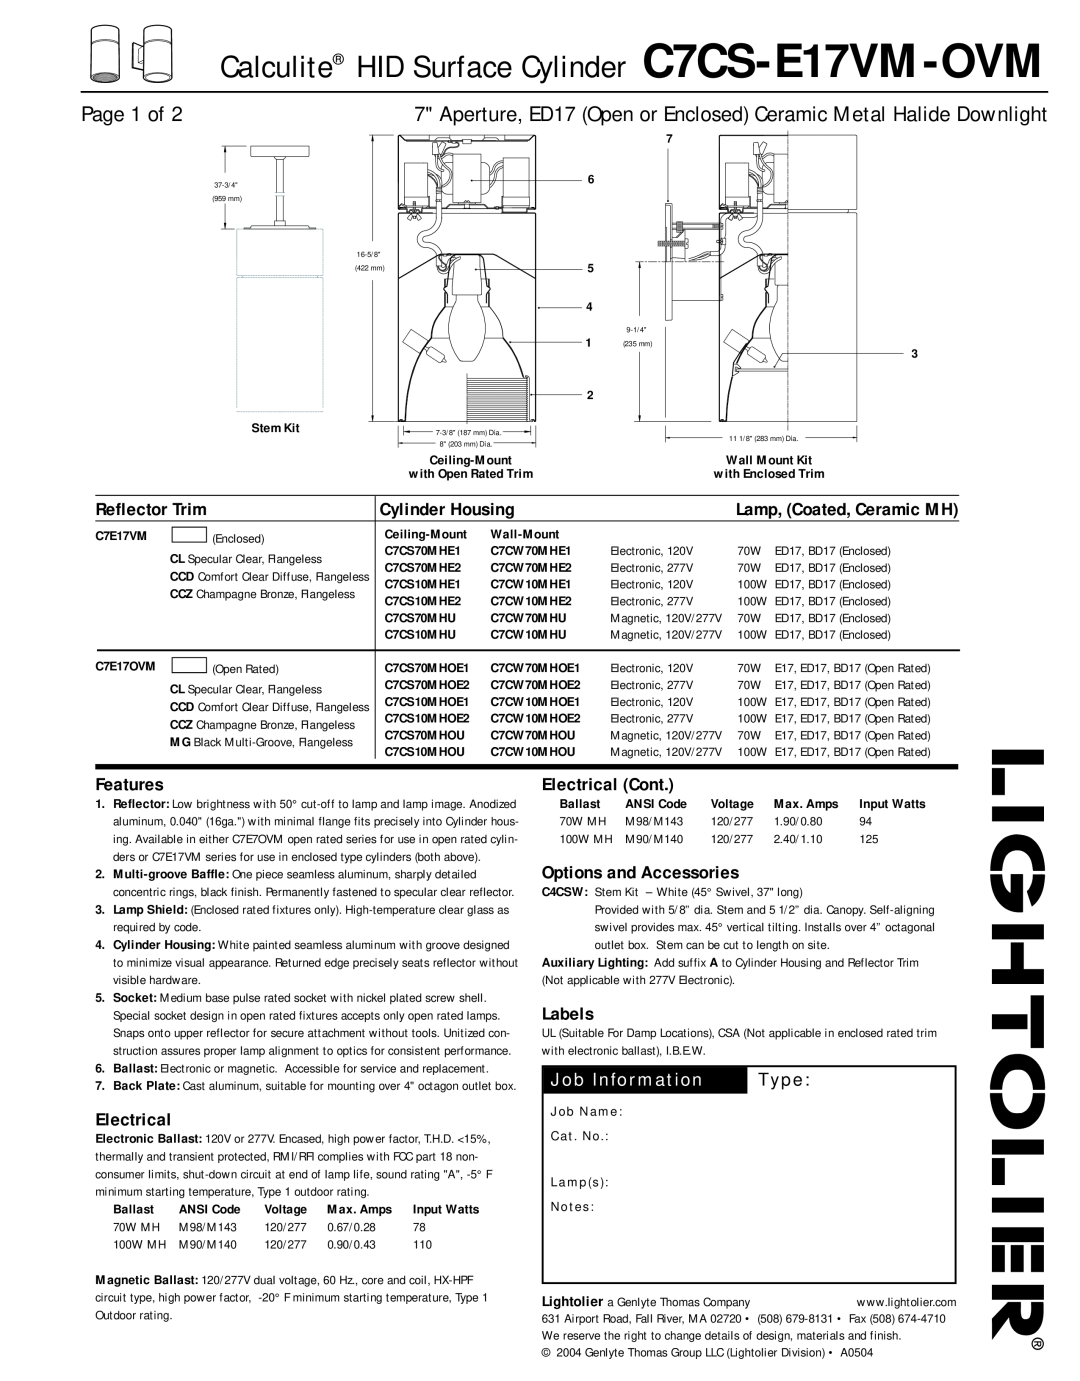 Lightolier manual Calculite HID Surface Cylinder C7CS-E17VM-OVM, Page 1 of, Job Information, Type, Reflector Trim 